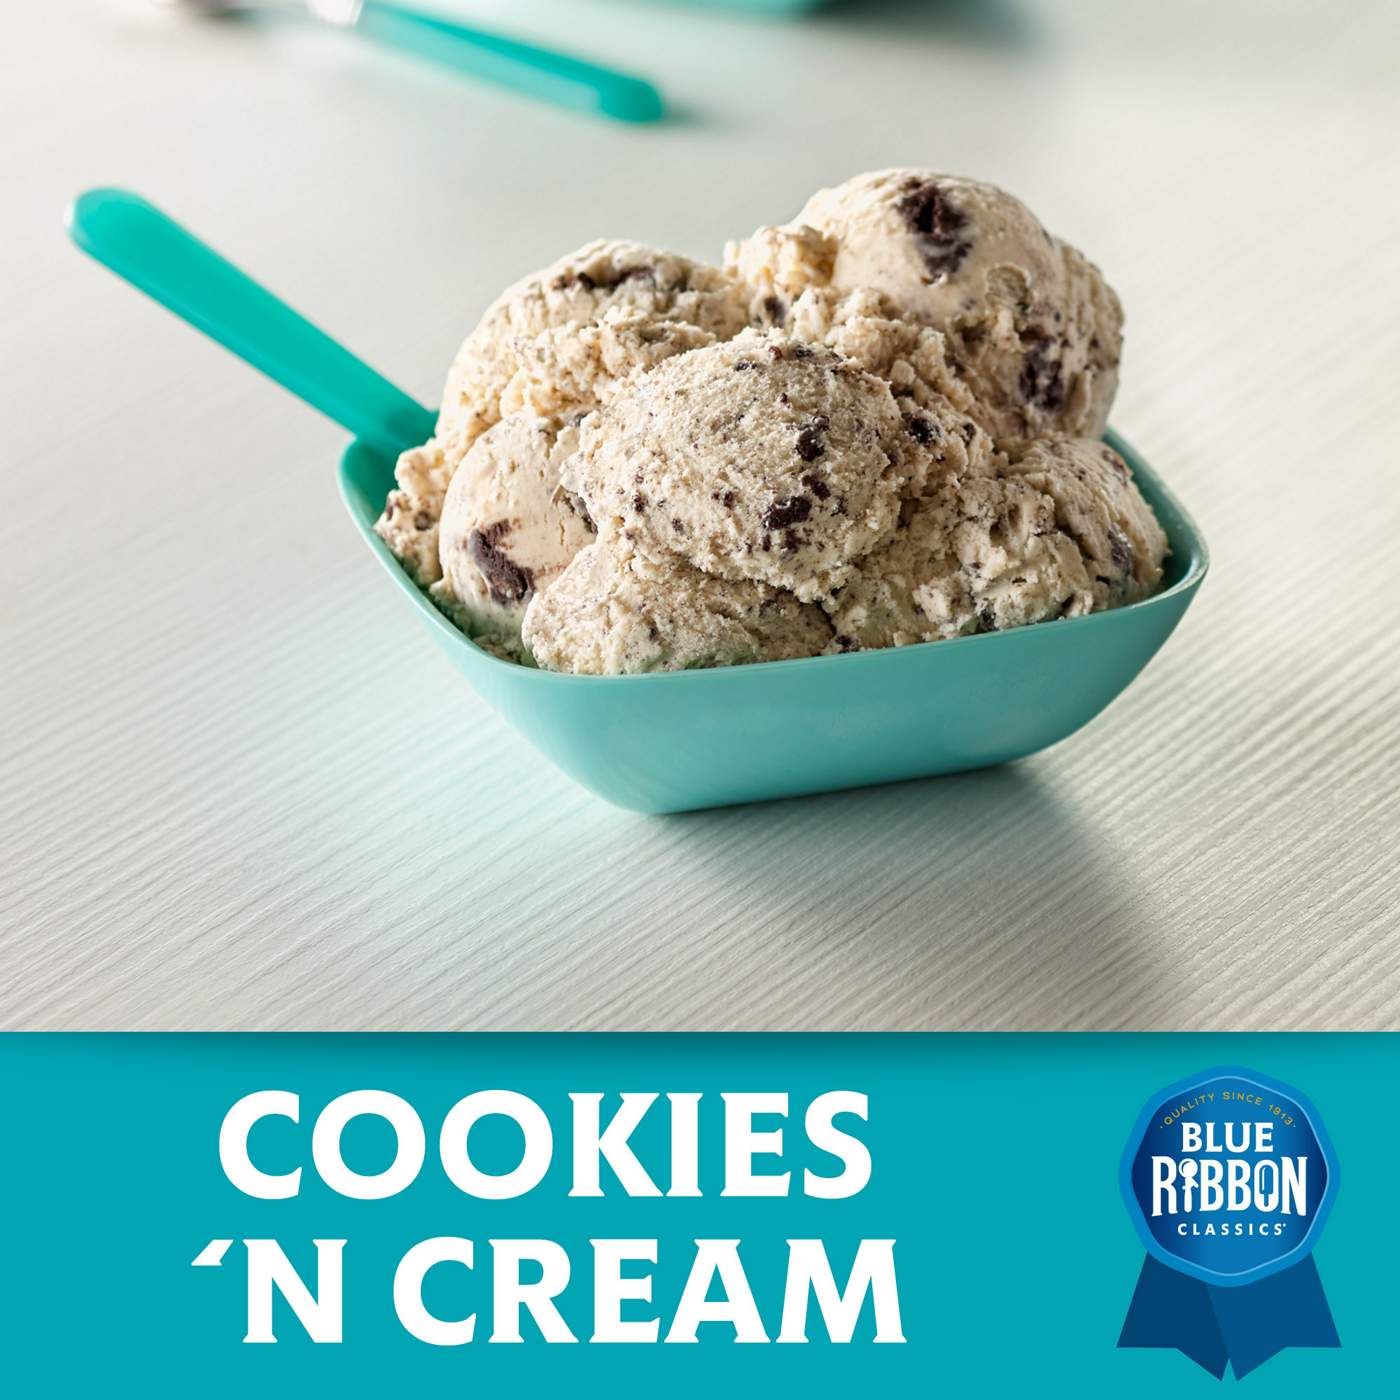 Blue Ribbon Cookies 'N Cream Ice Cream Family Size; image 2 of 2